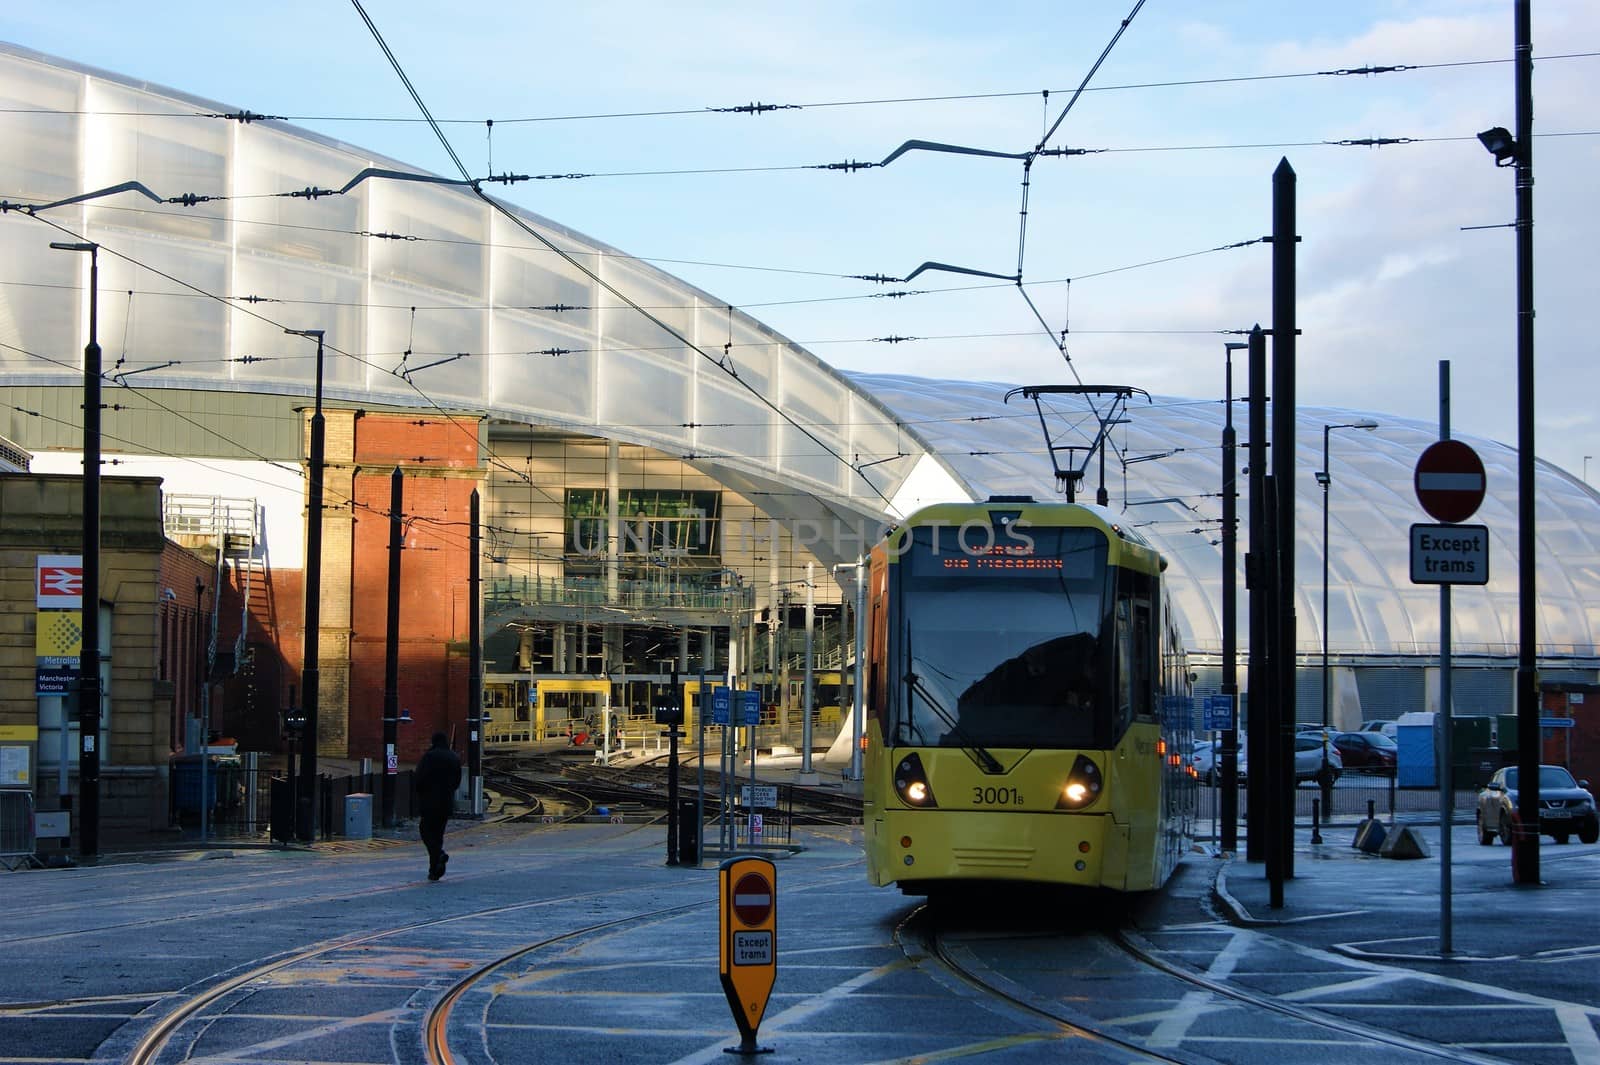 An image of an electric tram leaving Victoria station in Manchester, North West England,